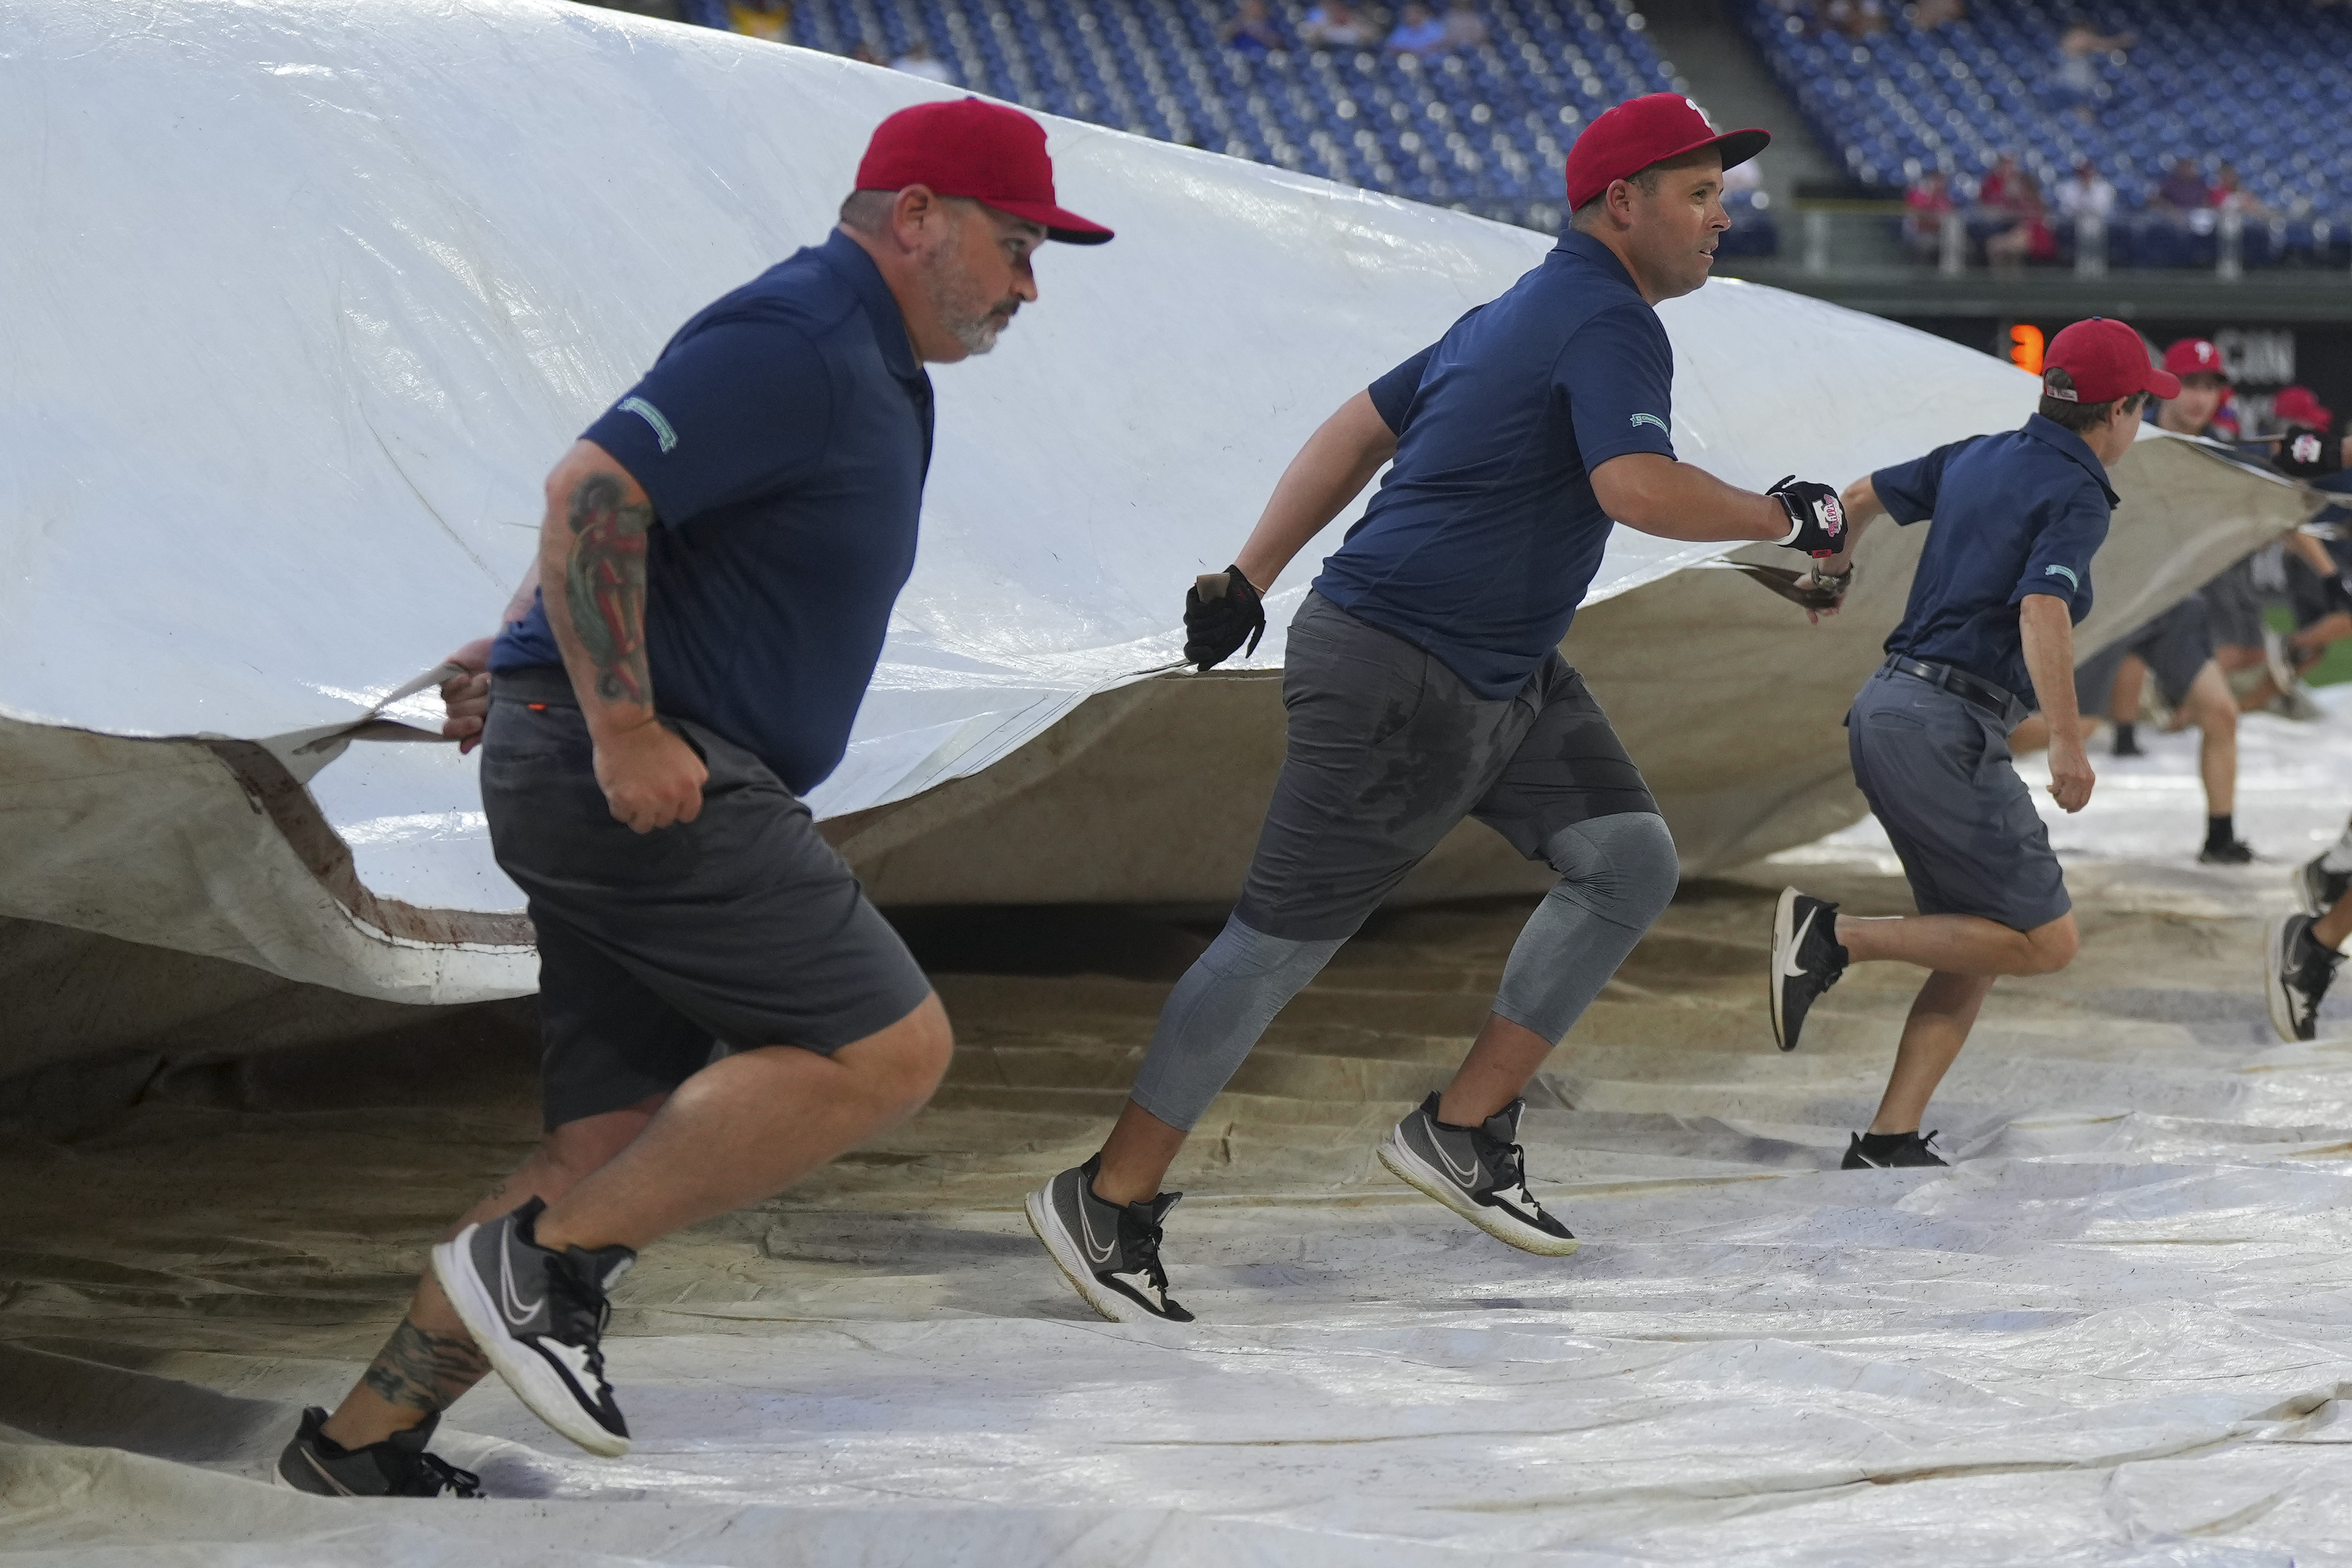 Members of the Philadelphia Phillies grounds crew pull the tarp over the field prior to the game against the Miami Marlins at Citizens Bank Park on August 9, 2022 in Philadelphia, Pennsylvania.